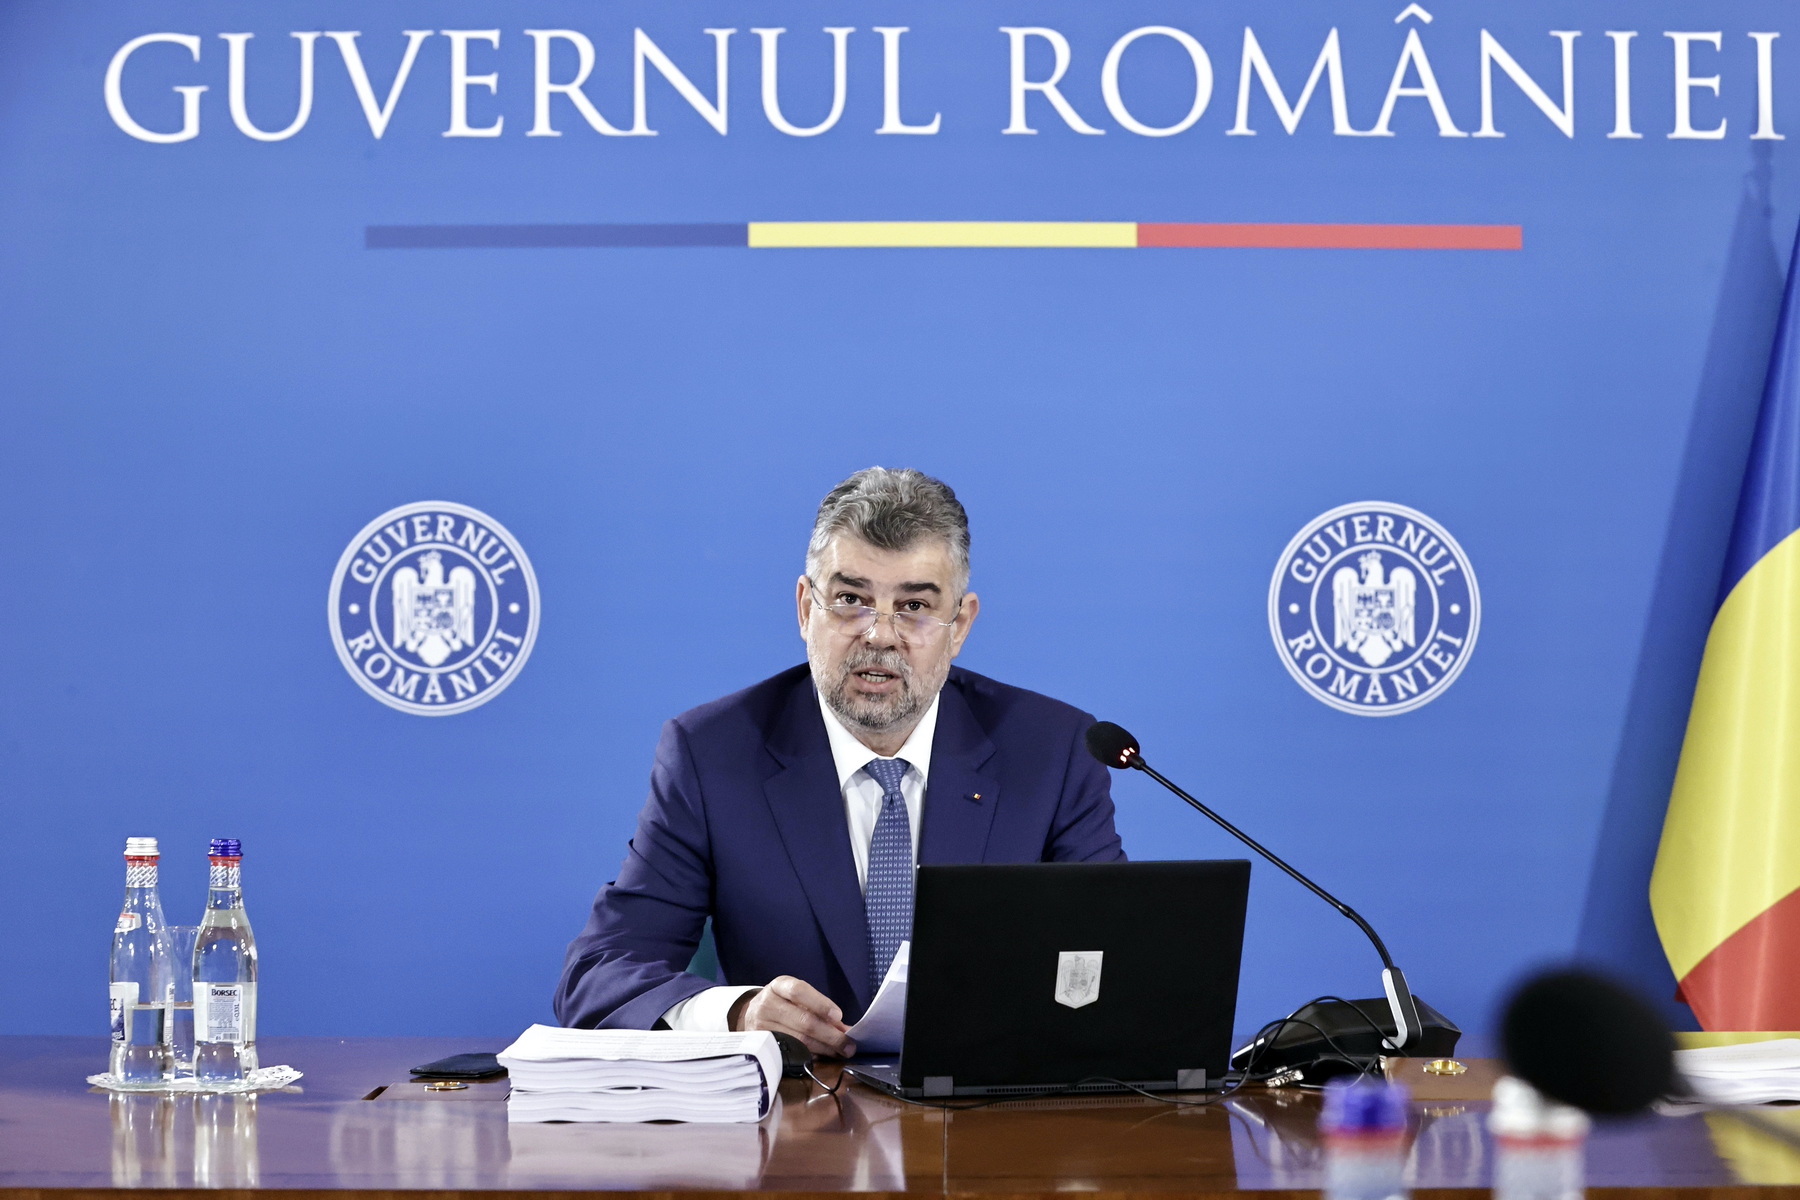 Romanian PM to be received by Pope Francis, meet Georgia Meloni during working visit to Italy